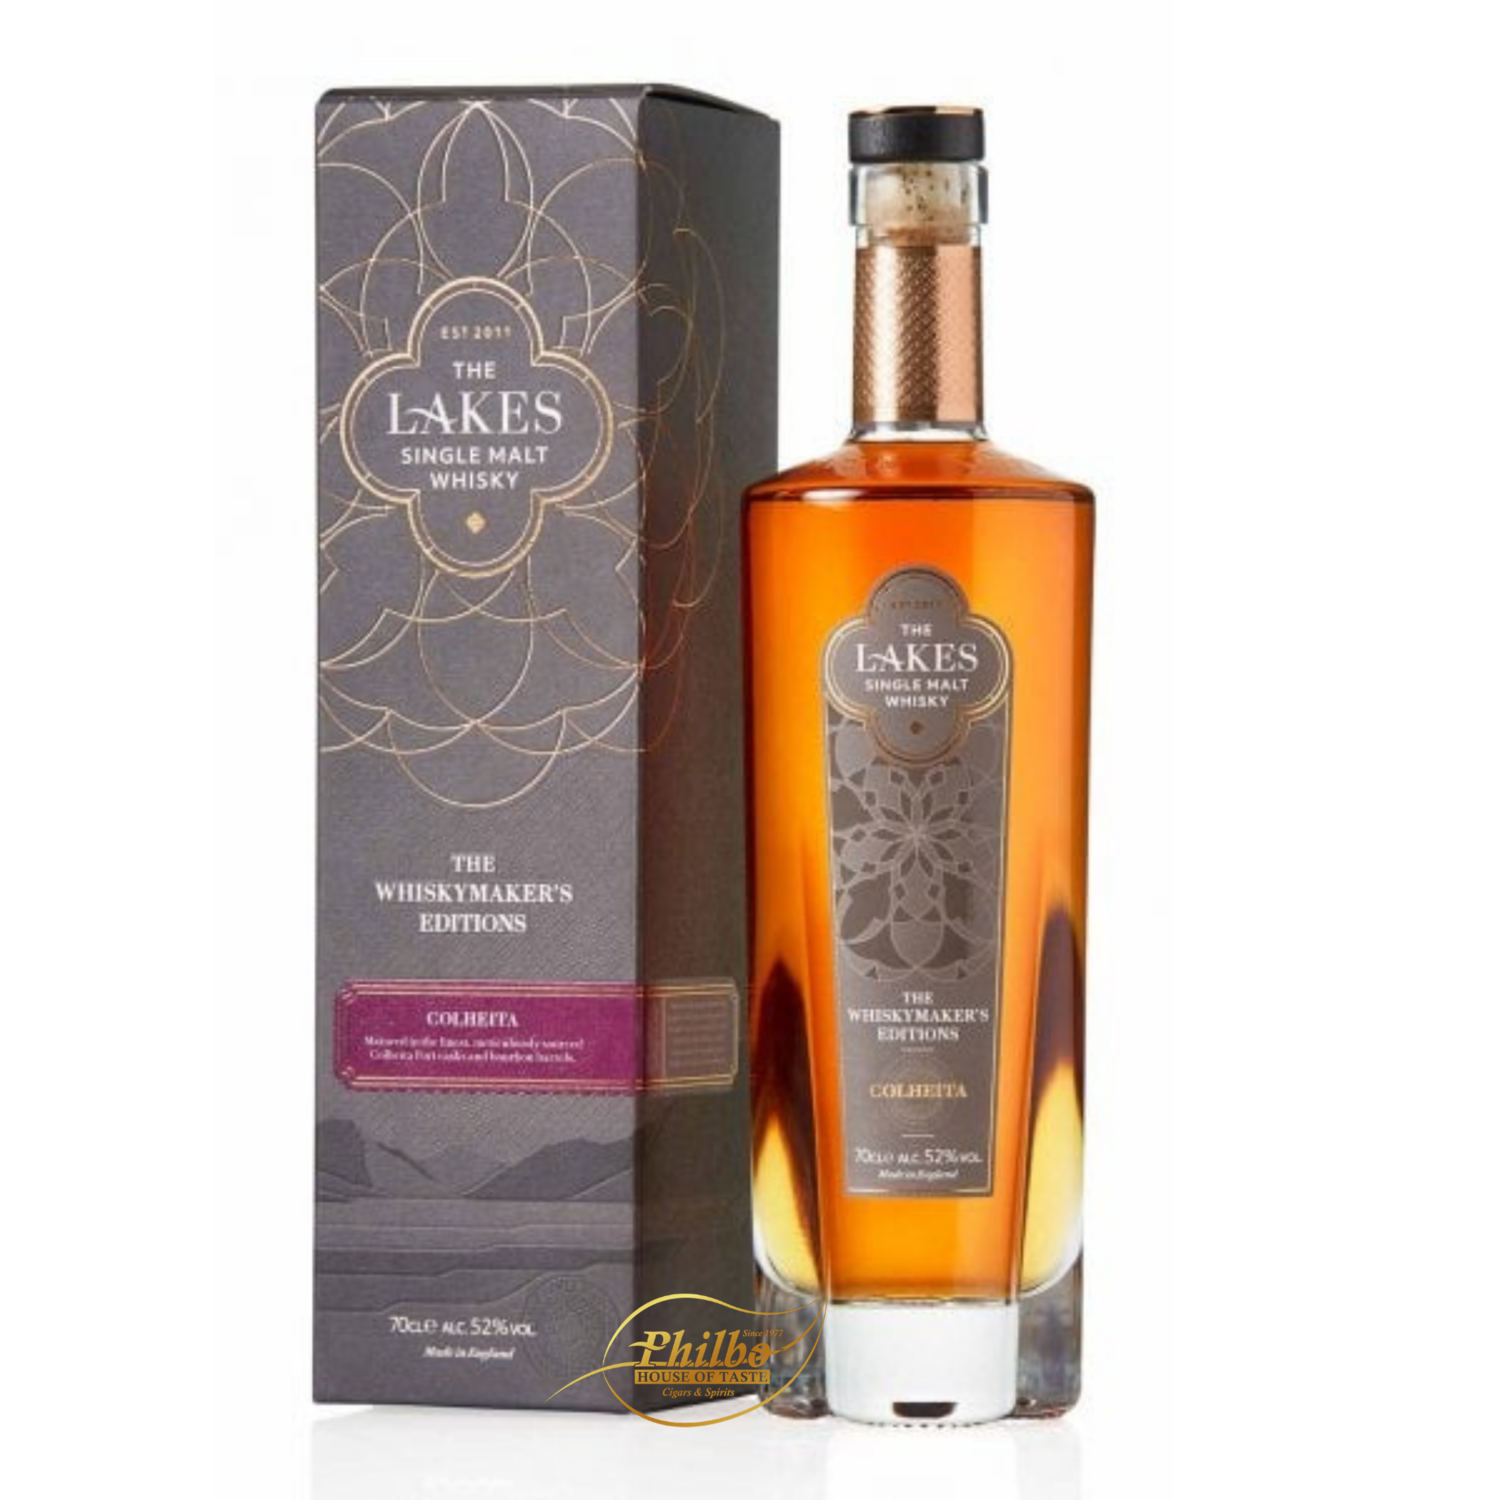 The Lakes - The Whiskymaker's Editions Colheita - 52% - 70cl